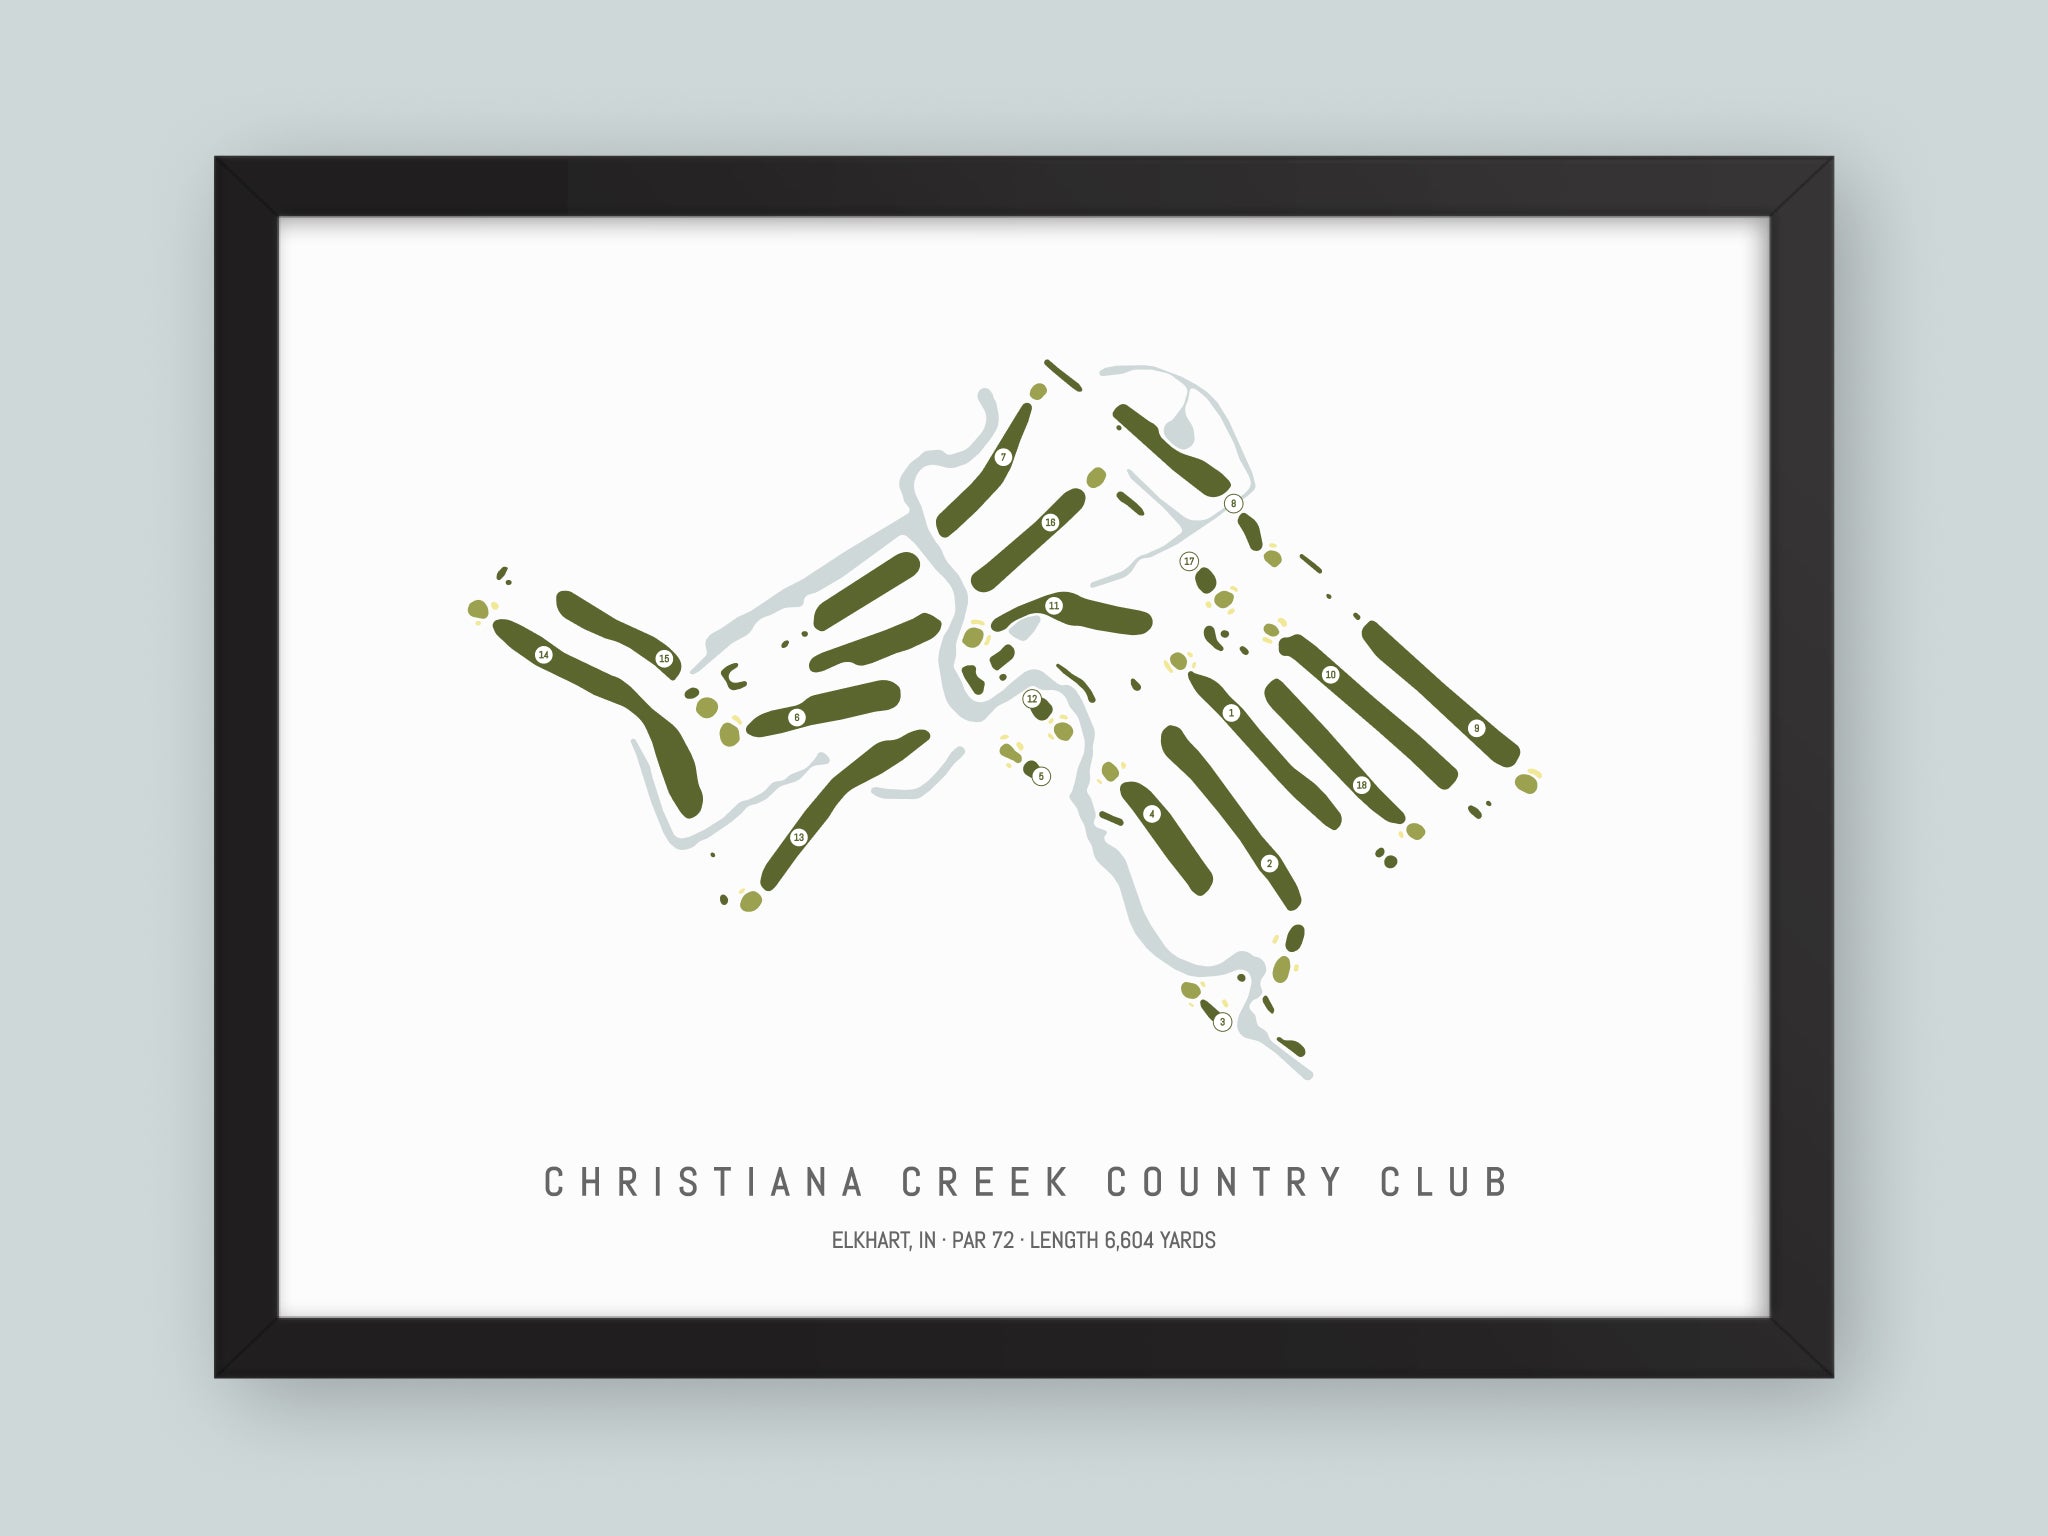 Christiana-Creek-Country-Club-IN--Black-Frame-24x18-With-Hole-Numbers